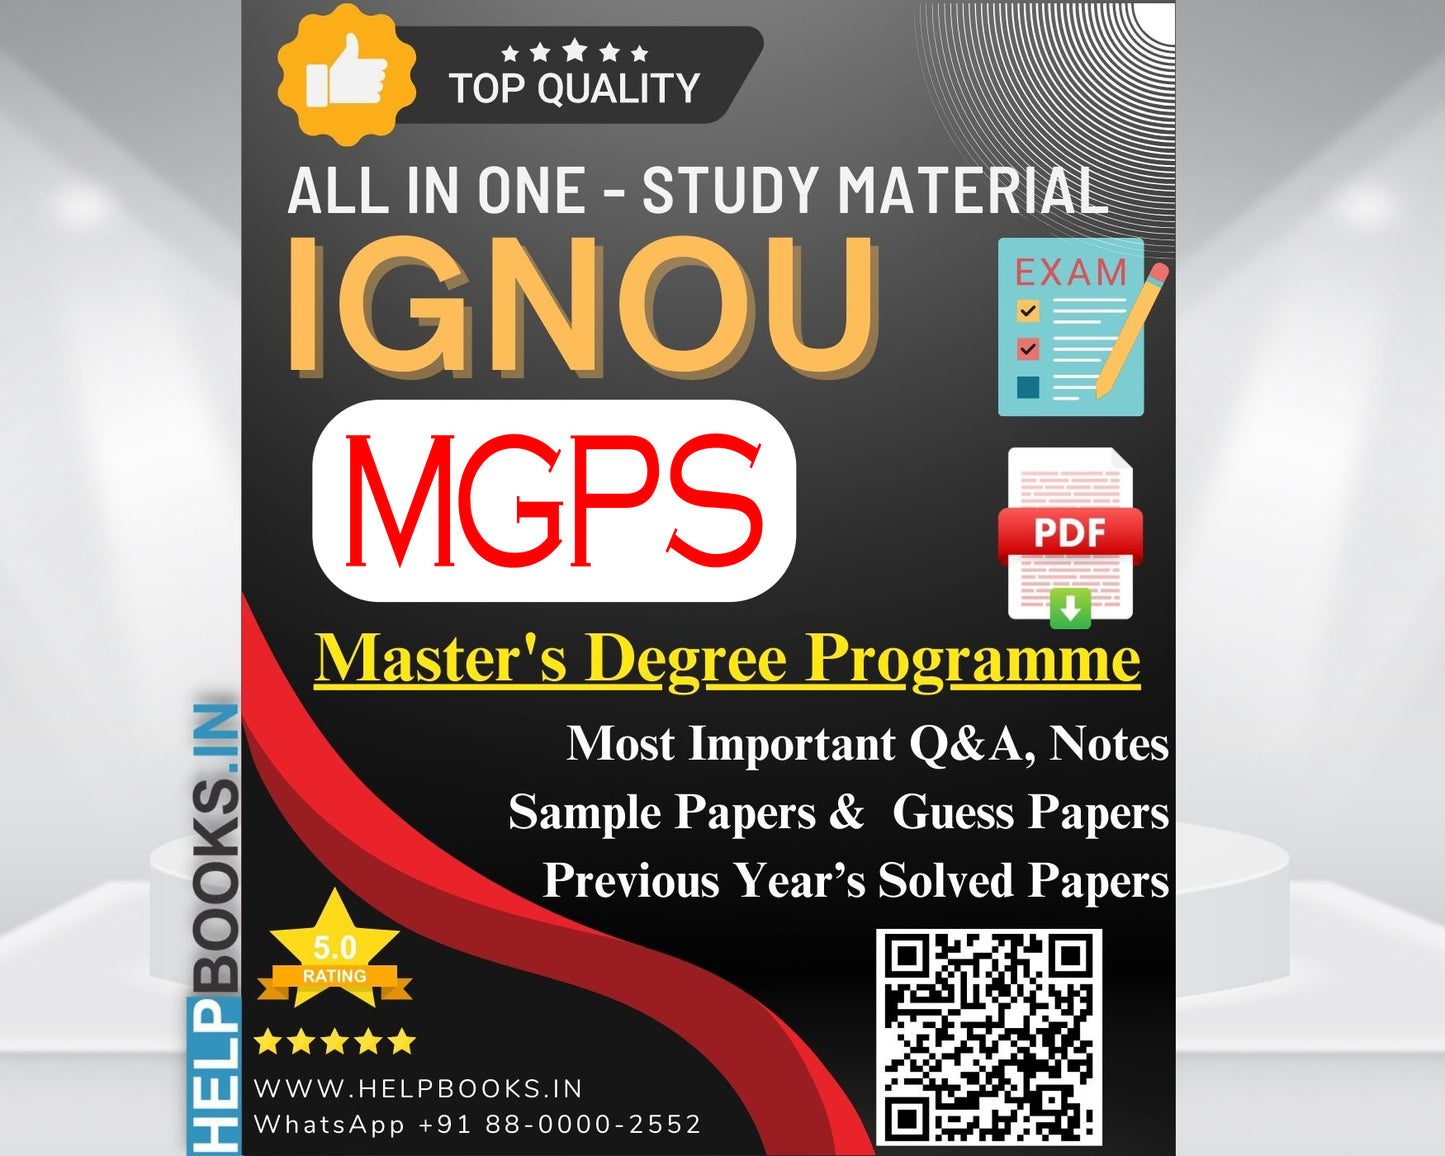 MGPS IGNOU Exam Combo of 10 Solved Papers: 5 Previous Years' Solved Papers & 5 Sample Guess Papers for Master of Arts Gandhi and Peace Studies